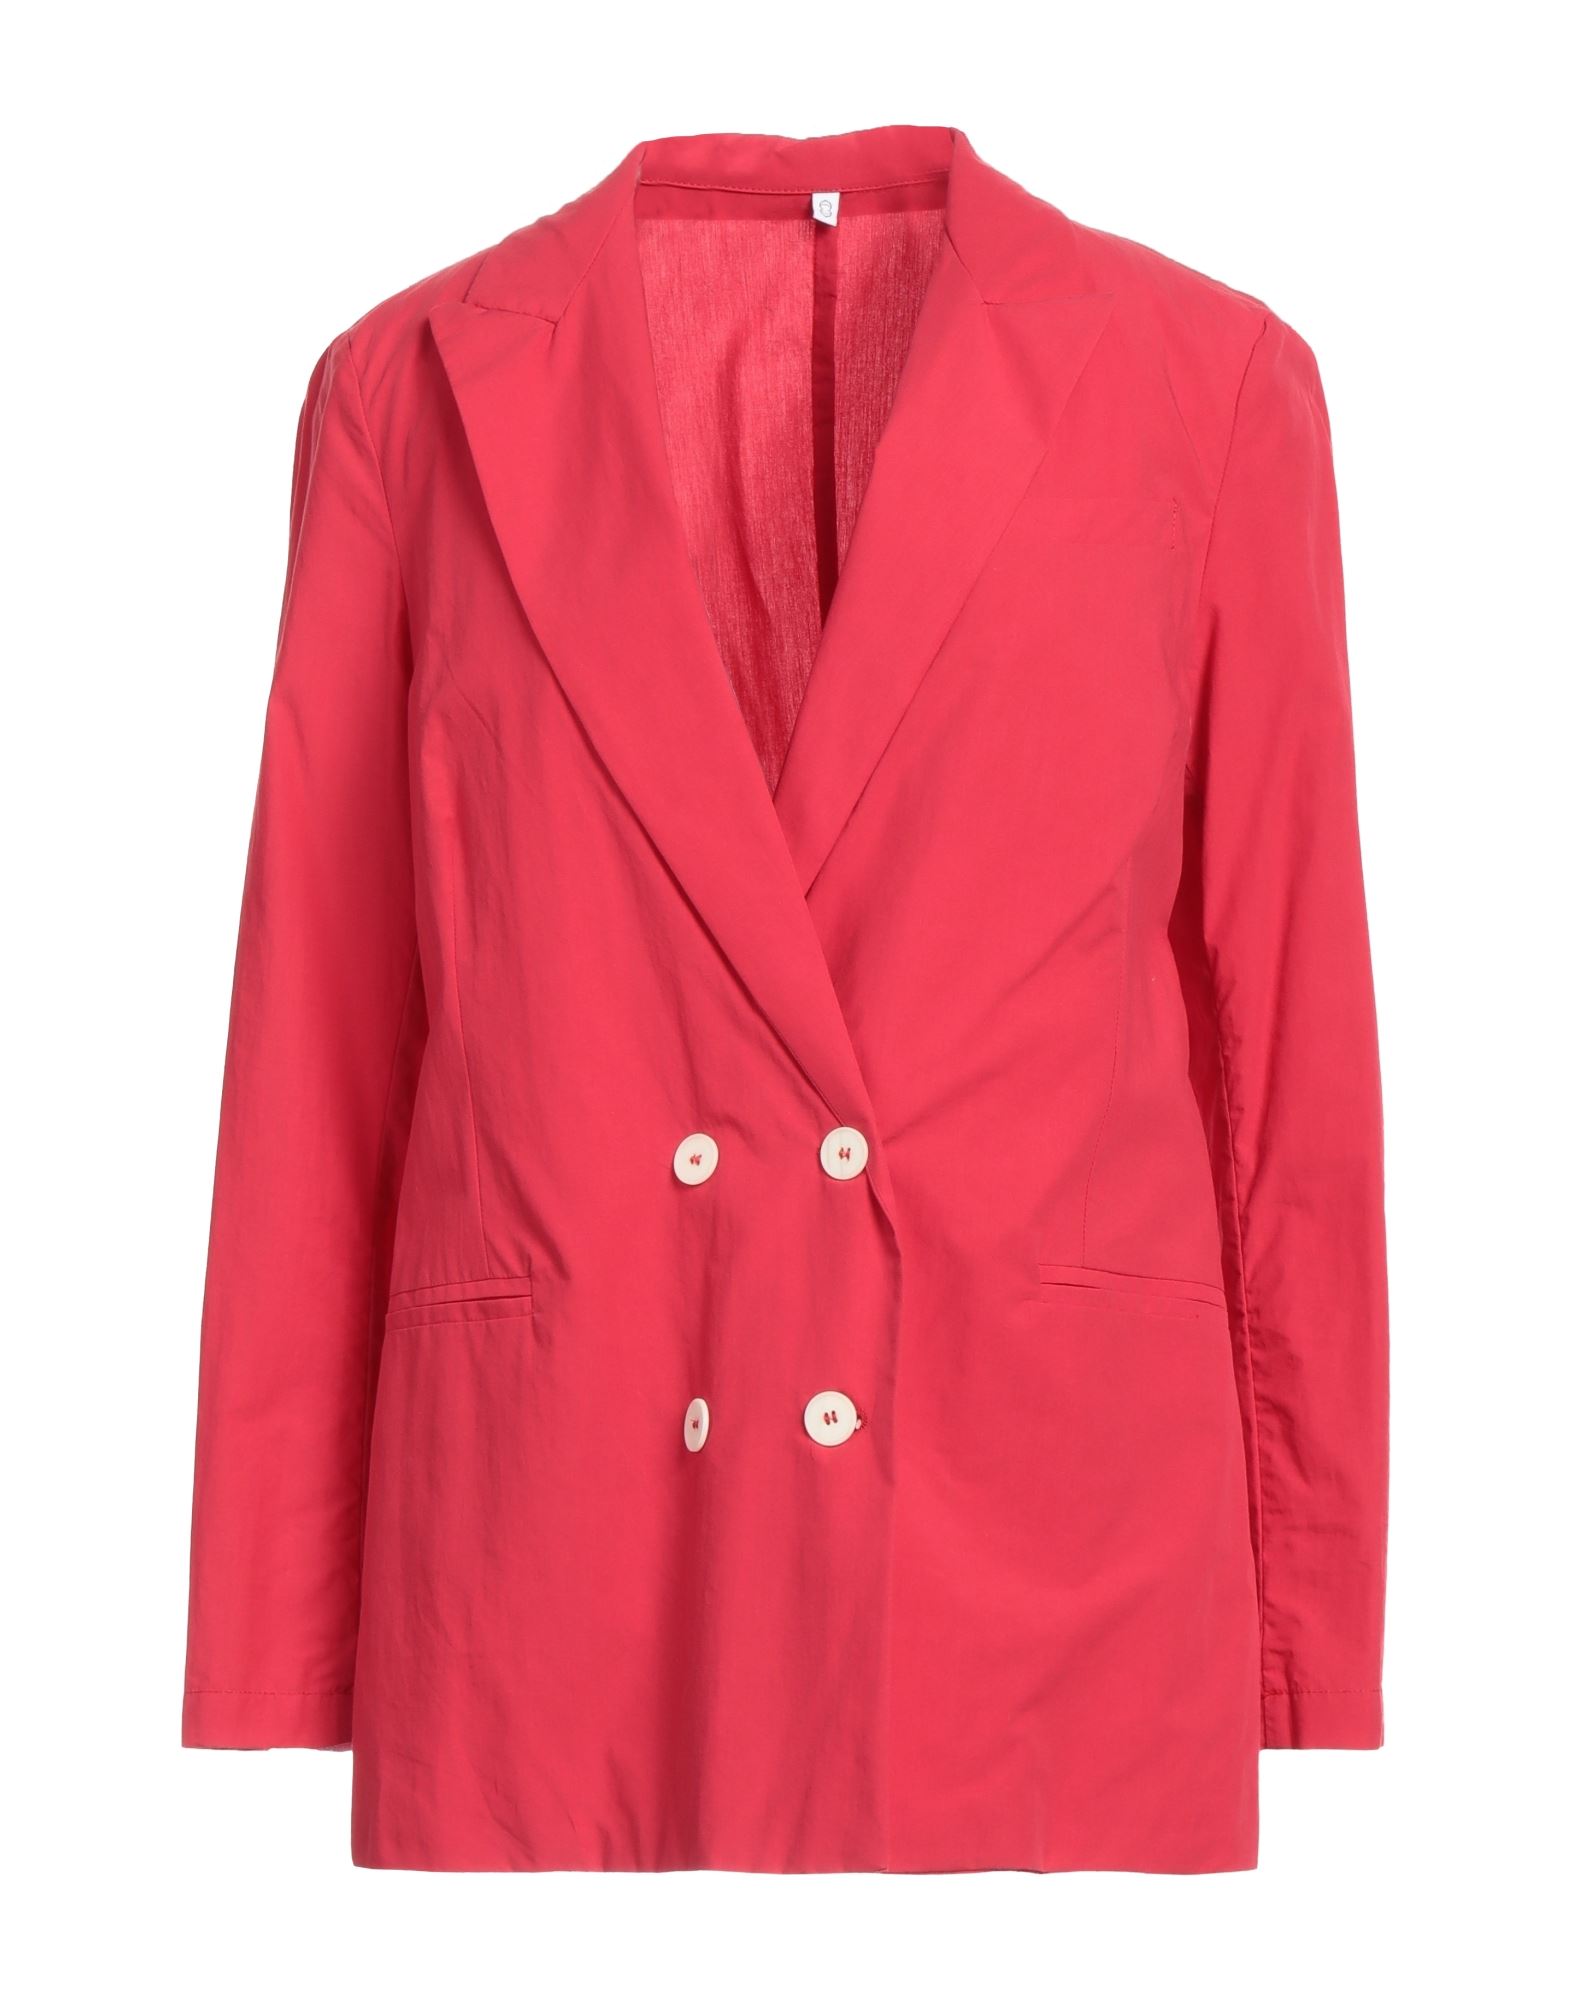 Ottod'ame Woman Suit Jacket Red Size 2 Cotton